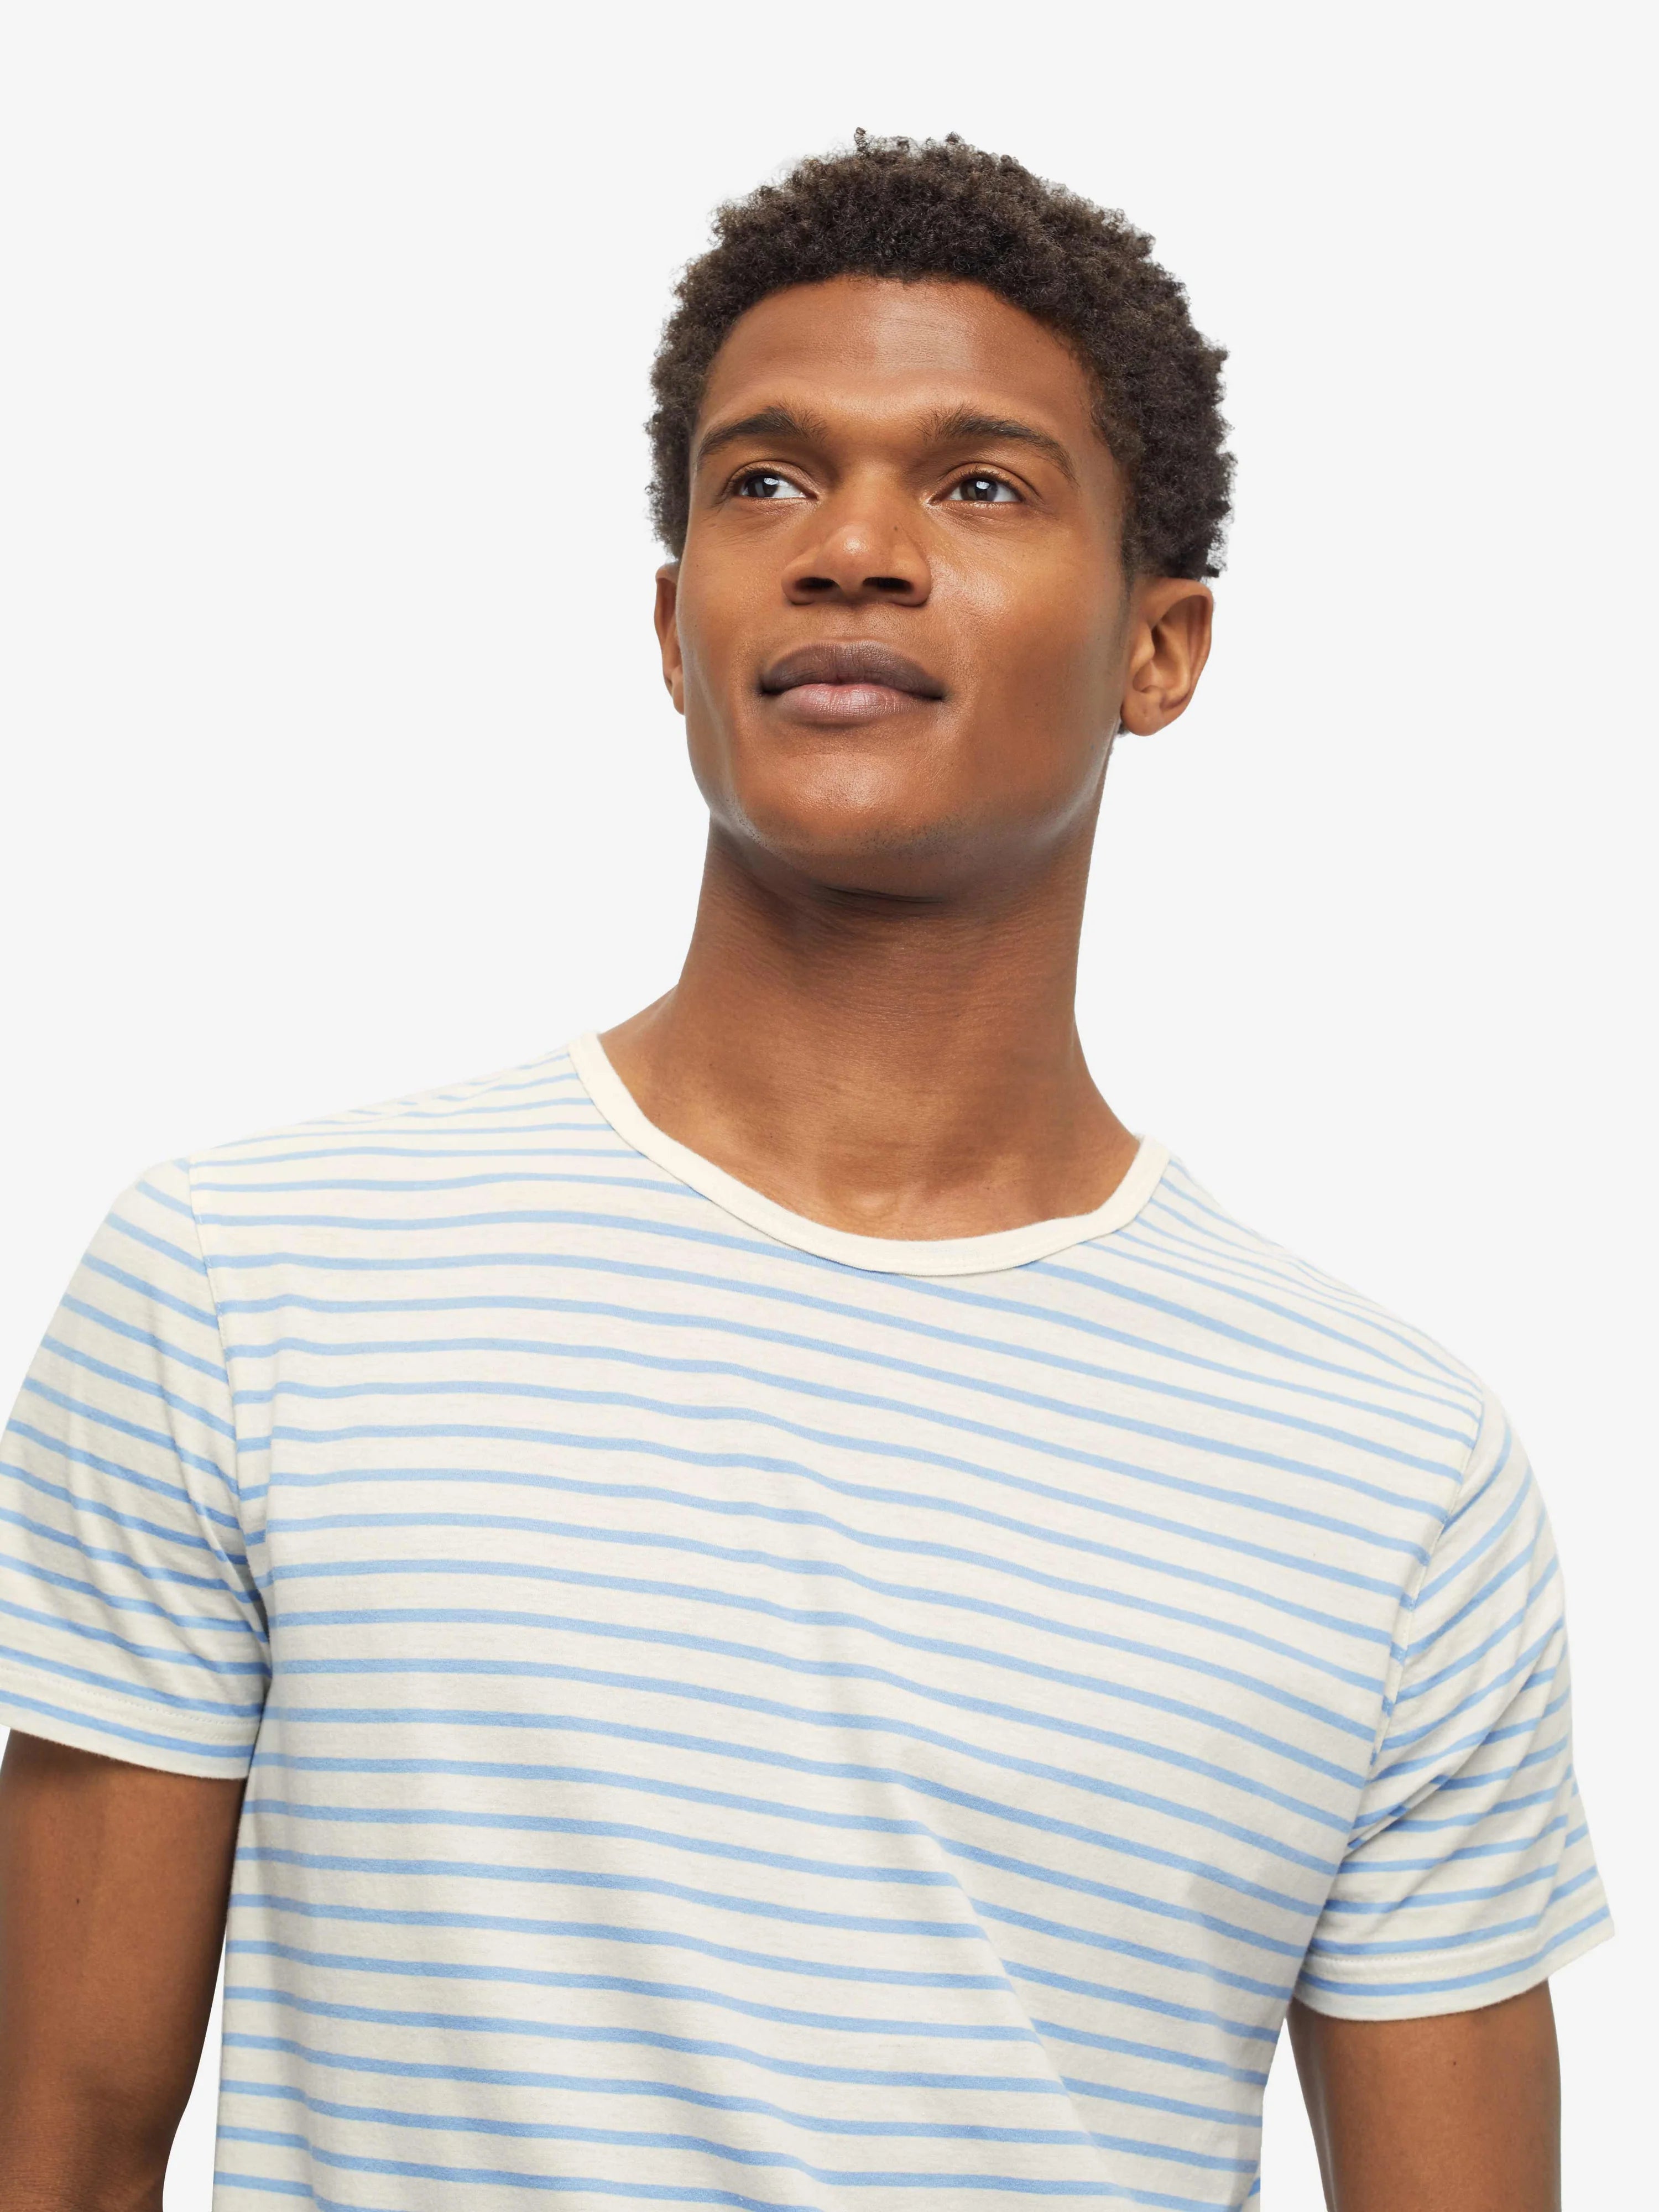 Ryder 2 Pima Cotton - White and Blue Striped